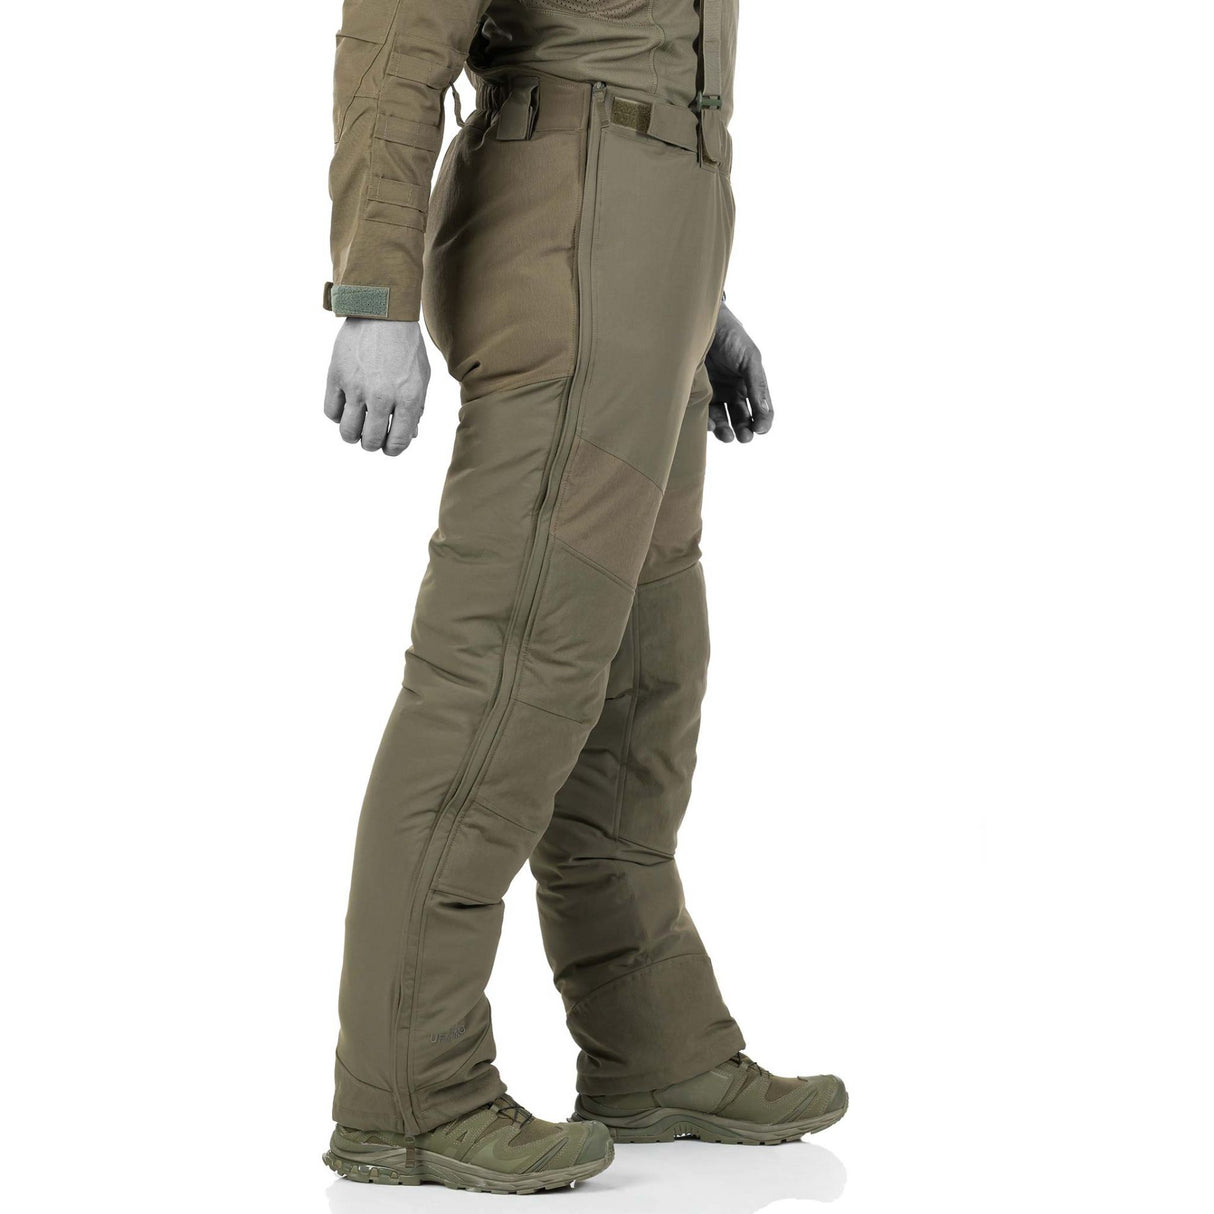 Delta OL 4.0 Tactical Winter Pants: Water-repellent and 100% windproof dual-layered ripstop fabric. UF PRO Flex/Zone® construction maintains insulation properties.